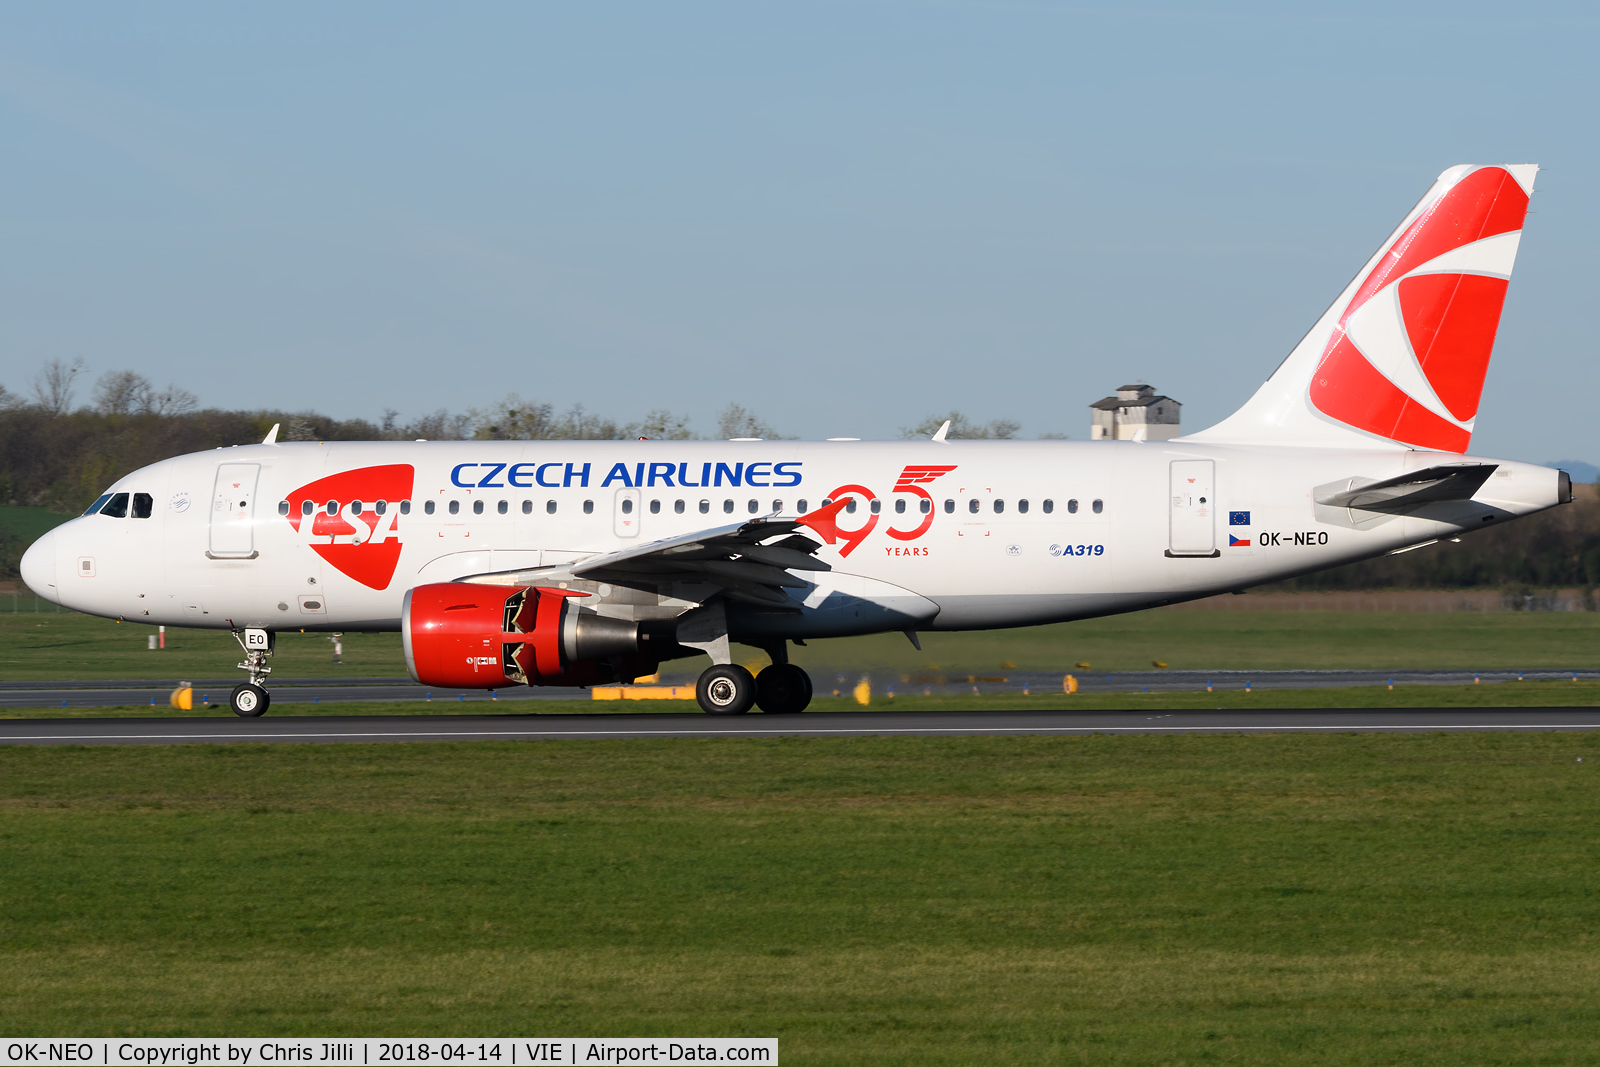 OK-NEO, 2008 Airbus A319-112 C/N 3452, Czech Airlines